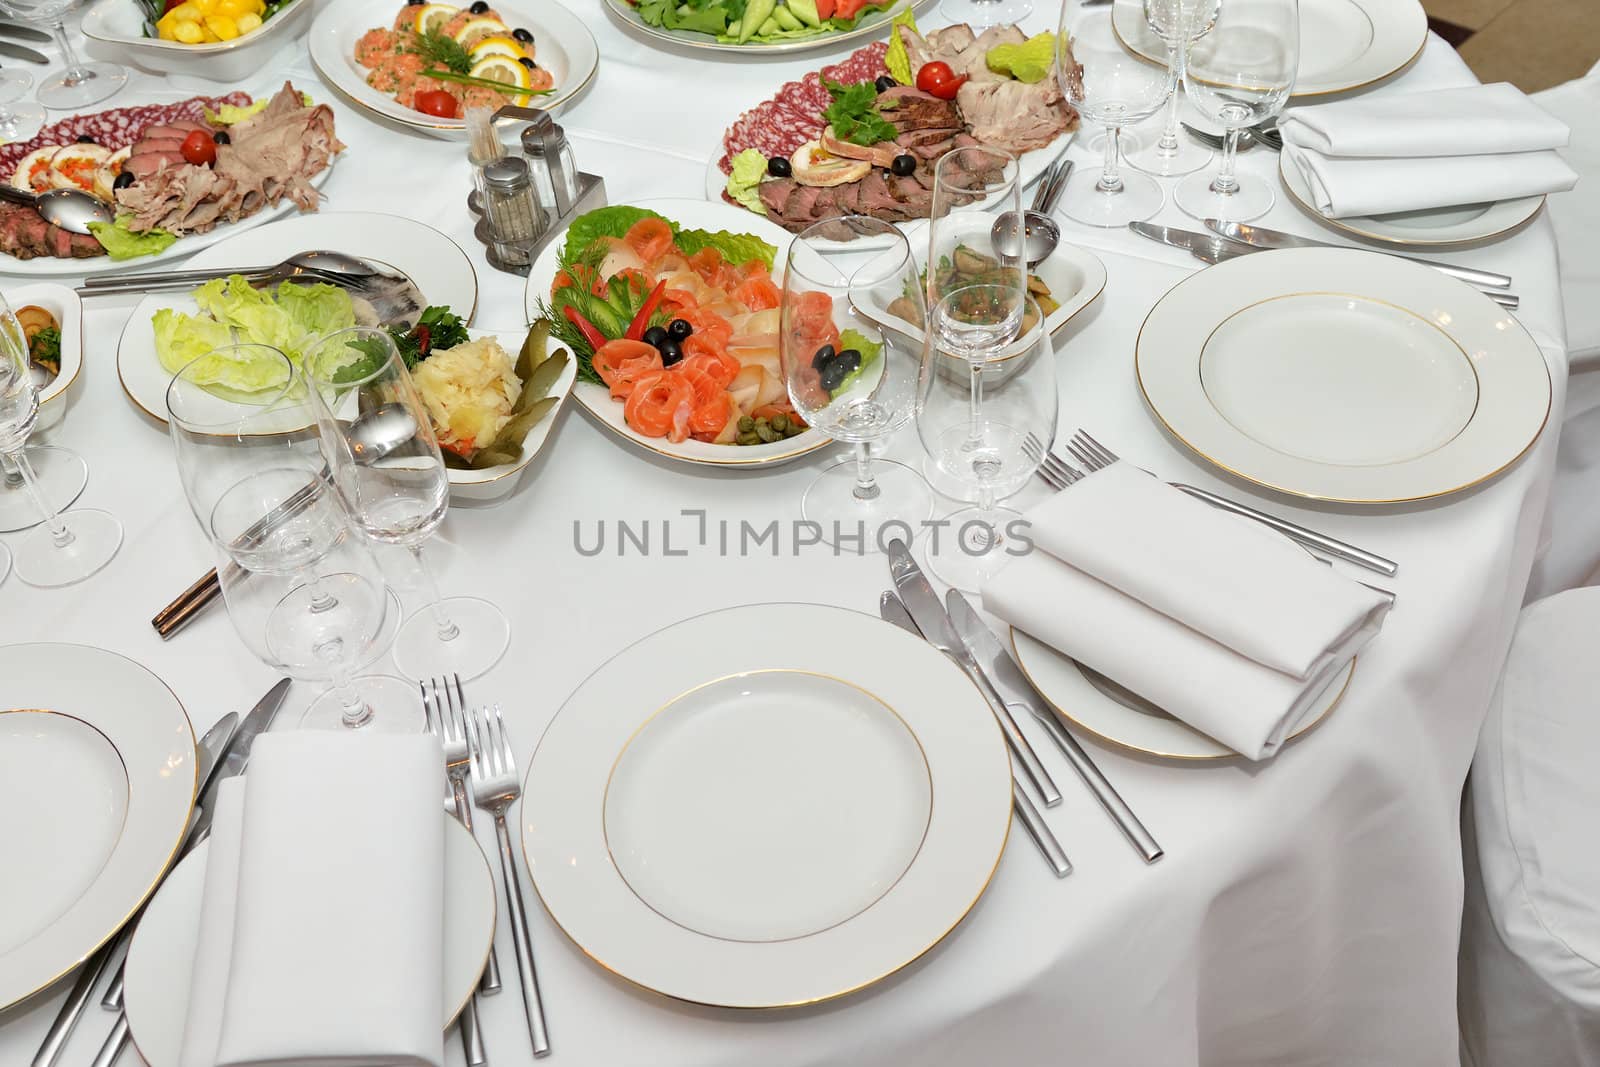 Served table by grauvision